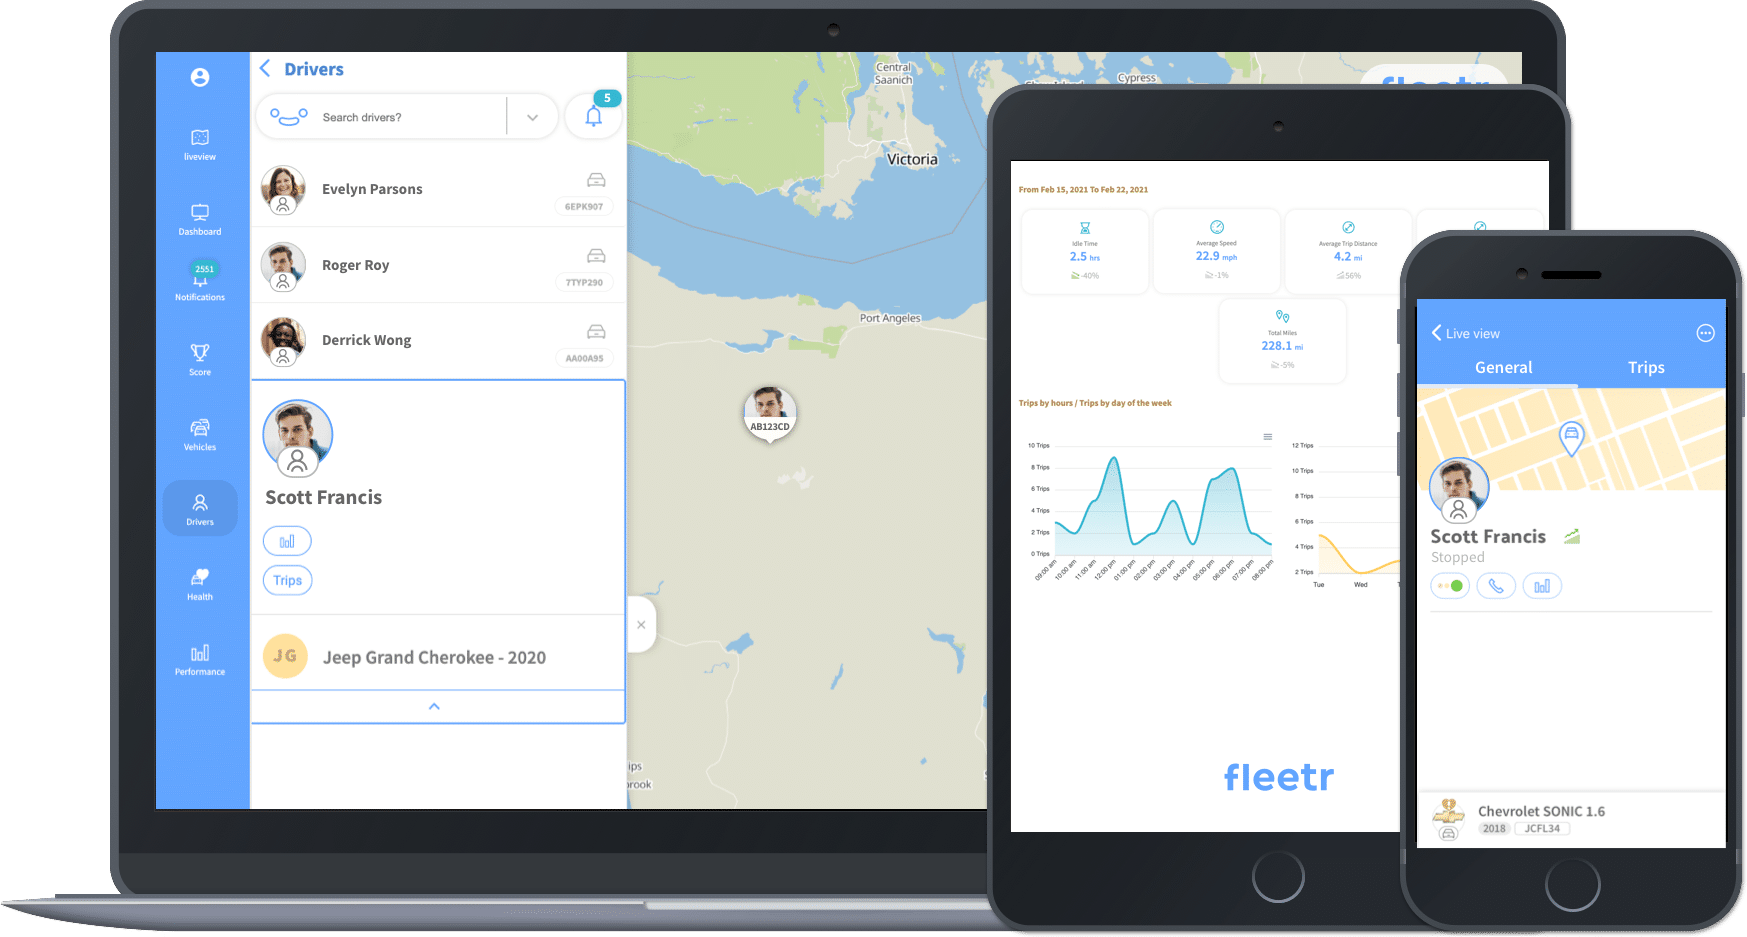 fleetr application gps tracker working on smartphone tablet and laptop devices